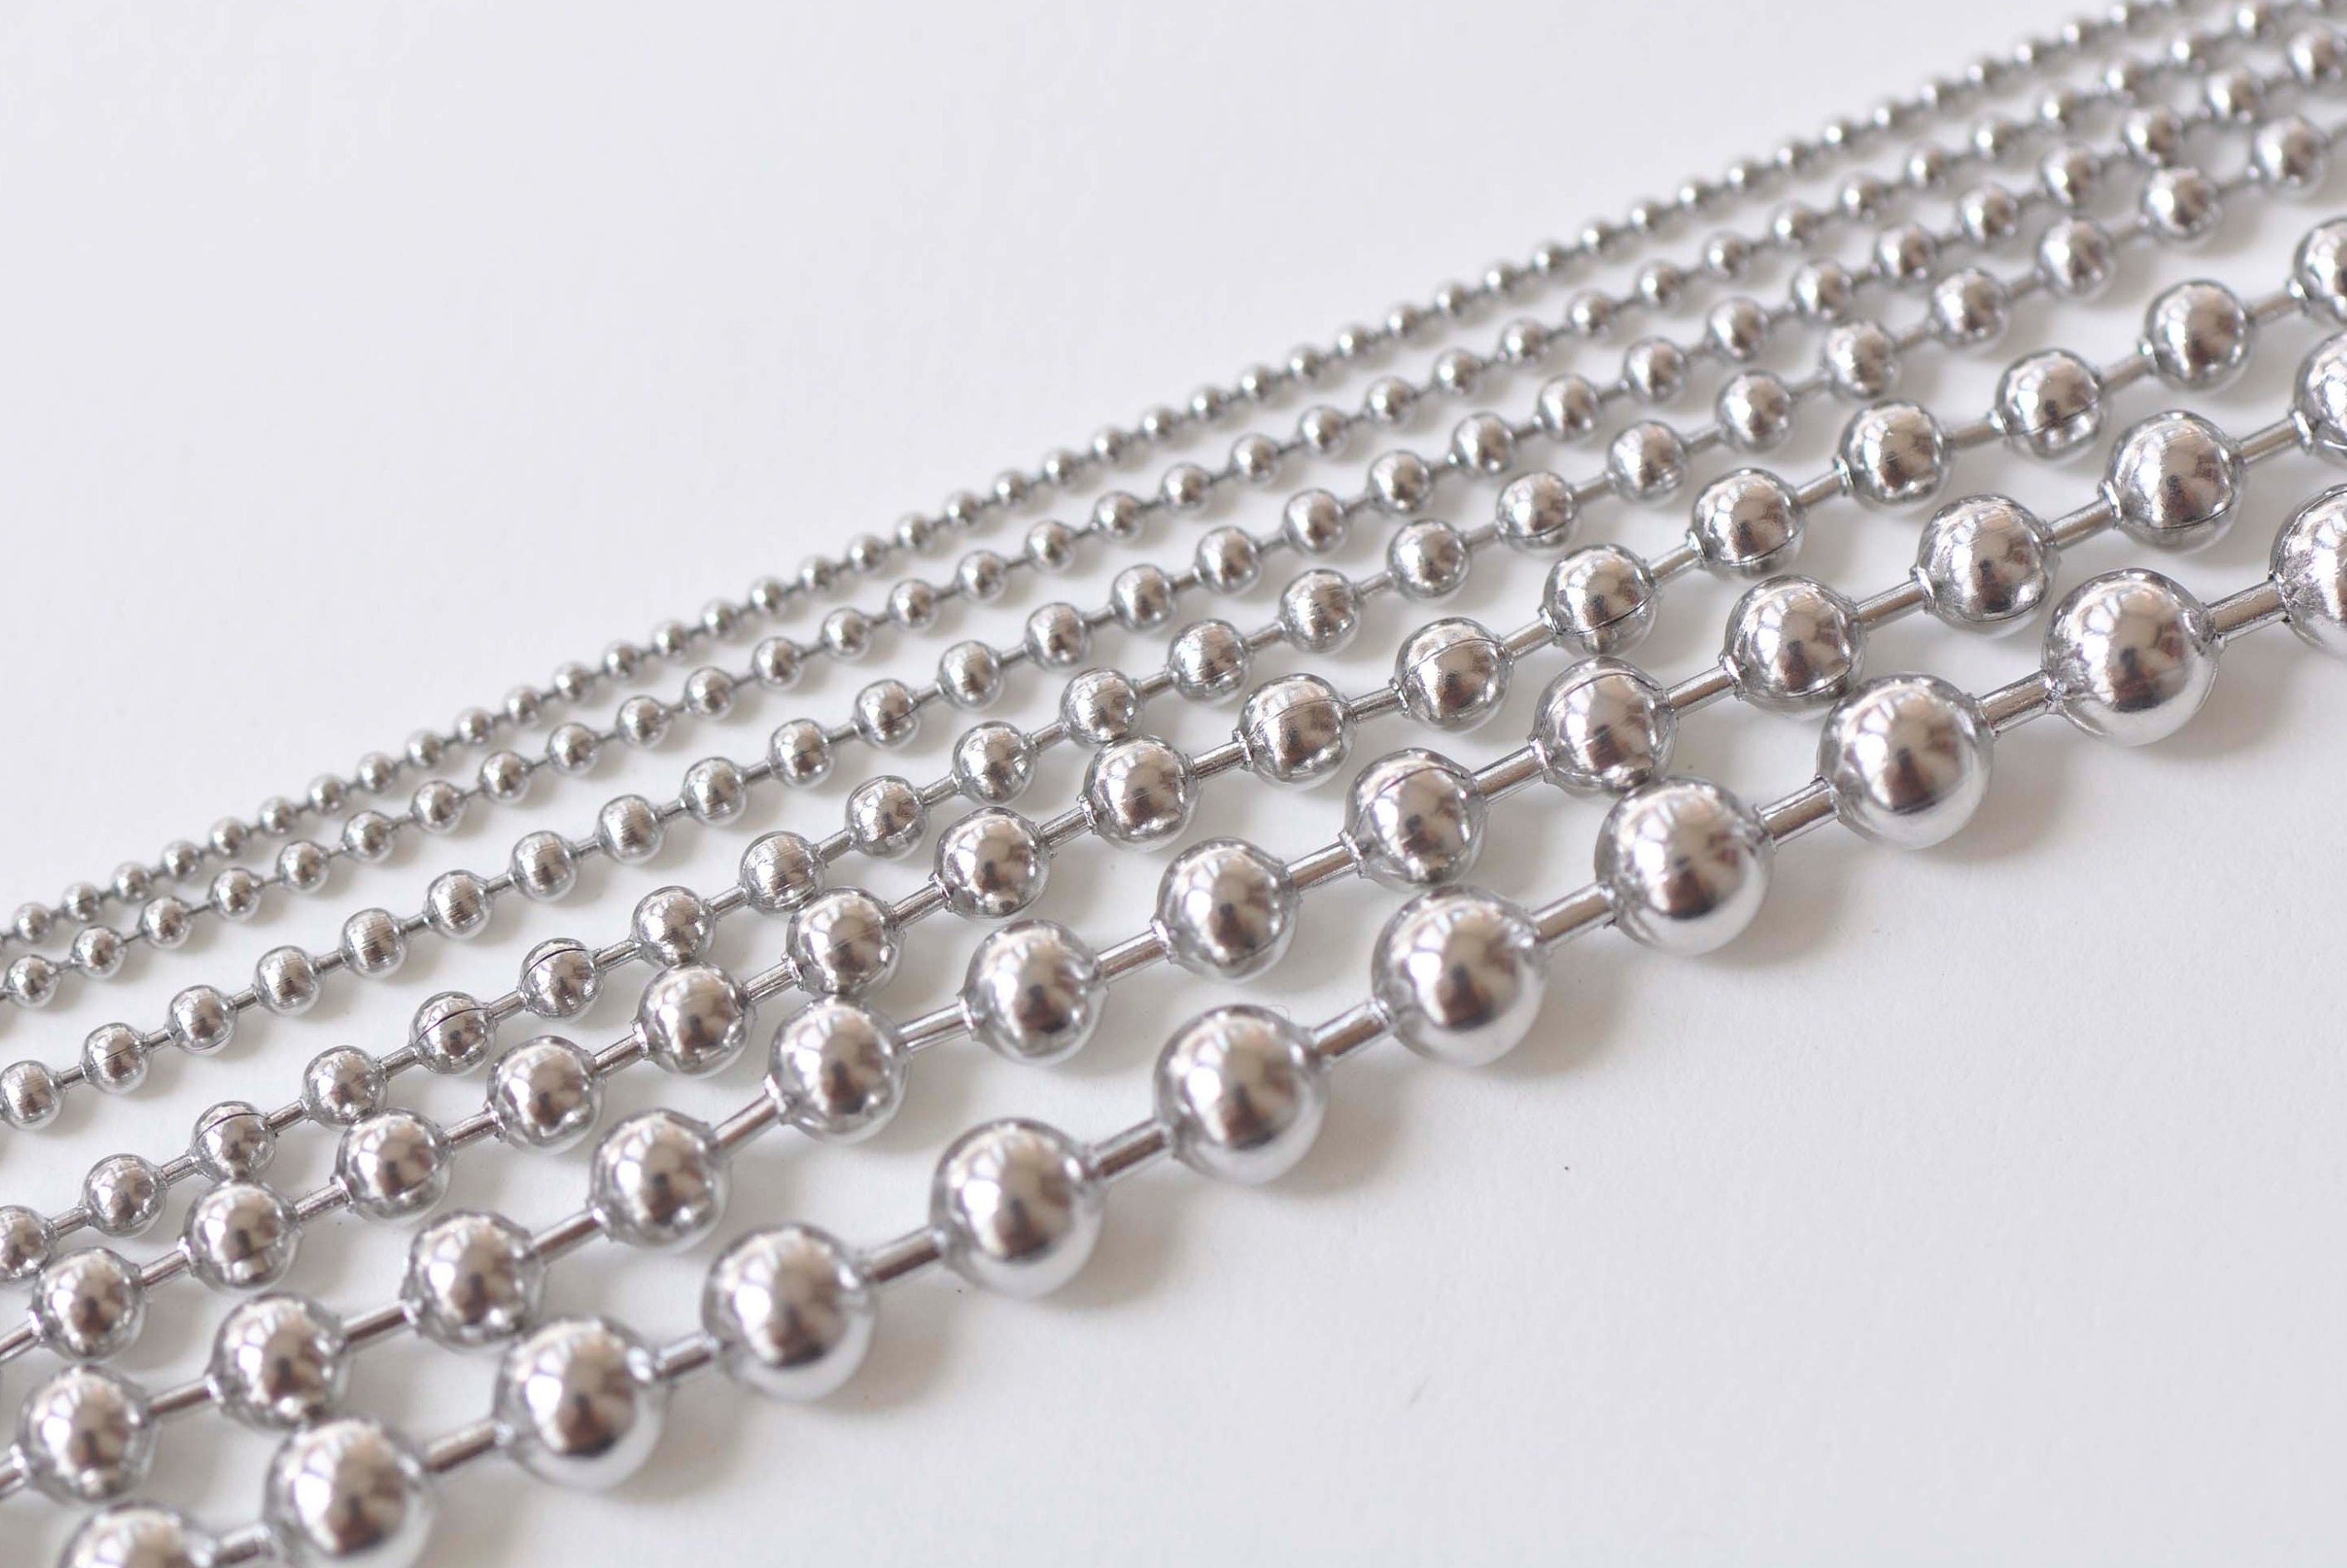 Stainless Steel Ball Chain 23 inch 1.5mm